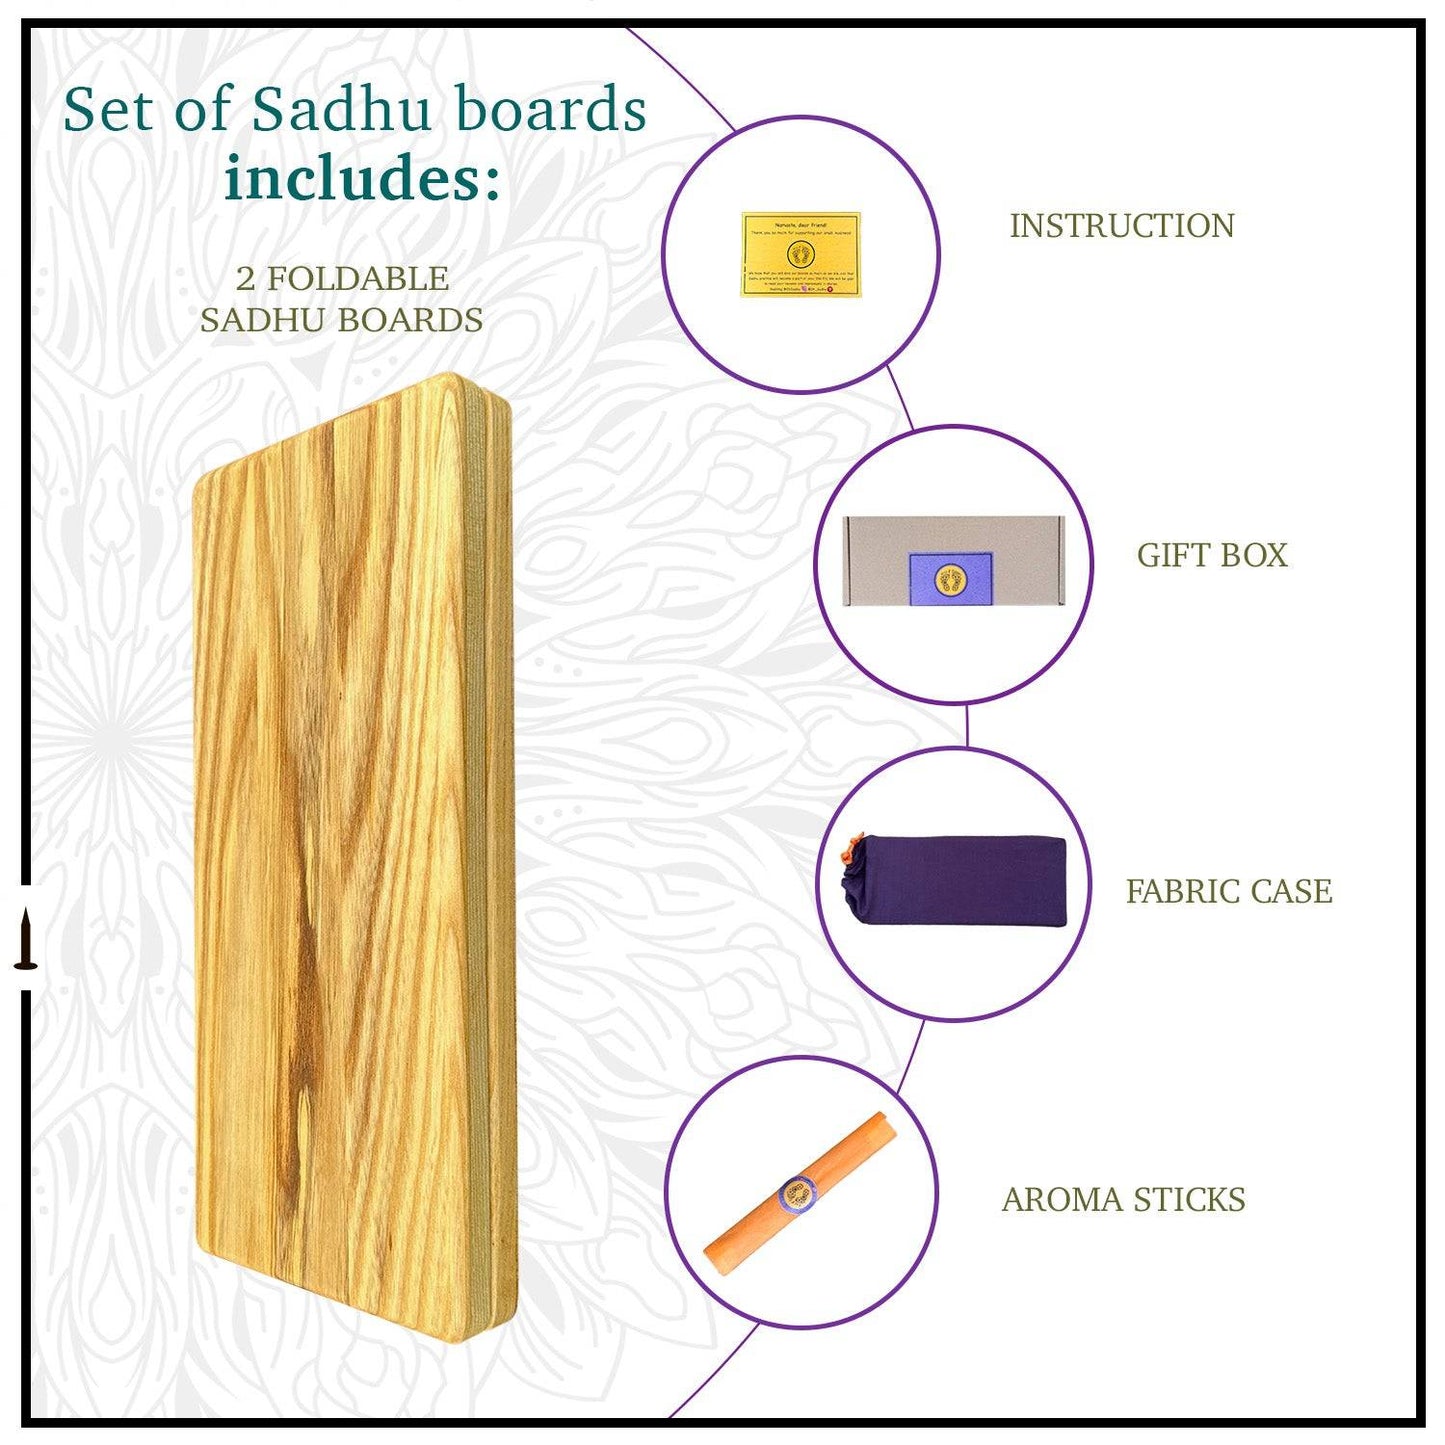 Sadhu board comes with instruction, gift box, fabric case, aroma sticks.